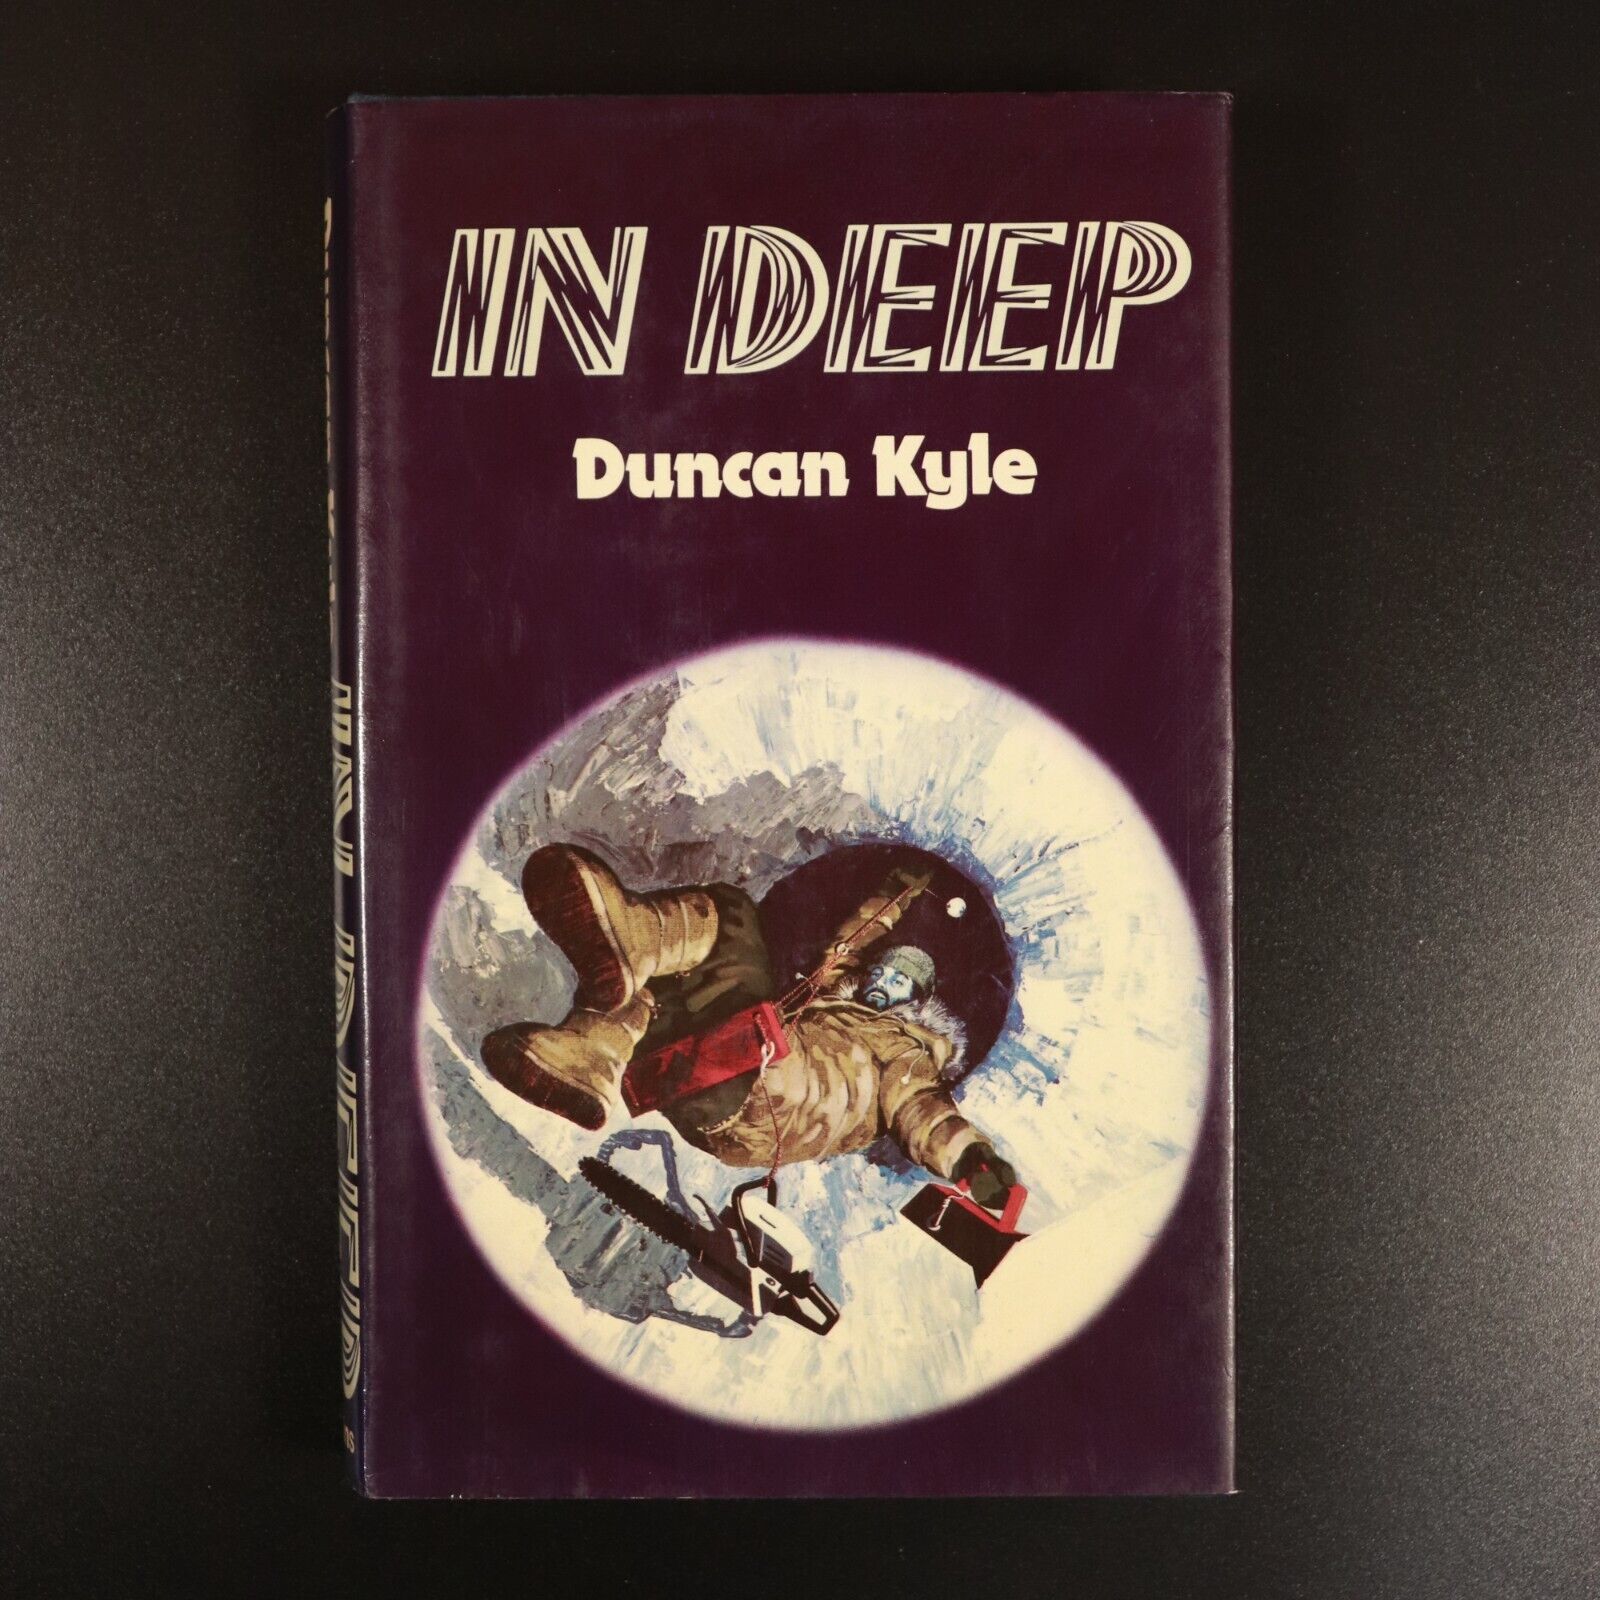 1976 In Deep by Duncan Kyle 1st Edition Vintage Adventure Fiction Book